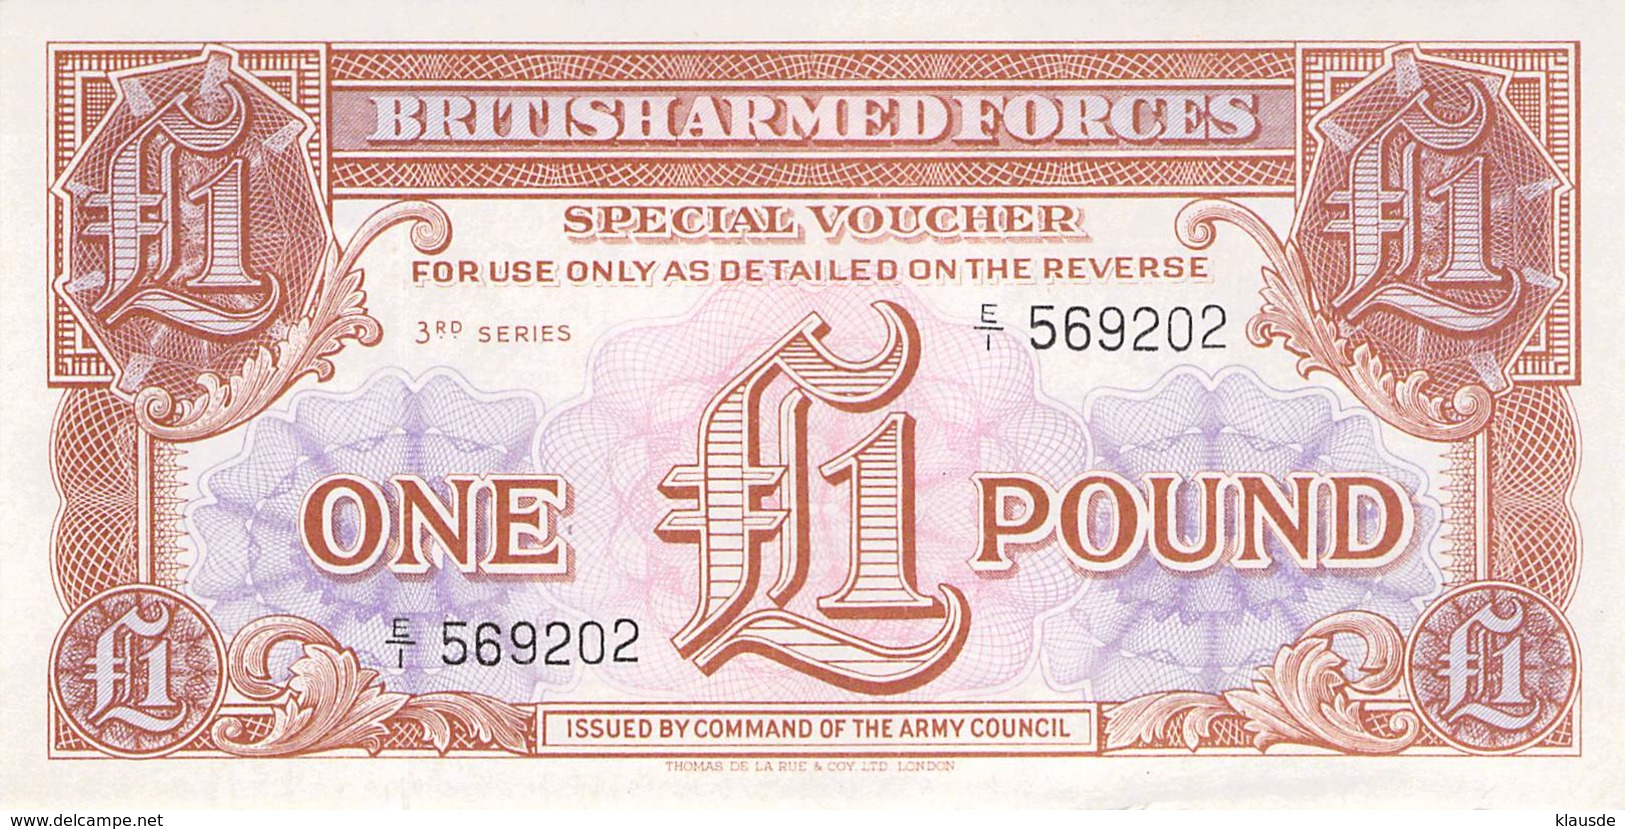 One Pound British Armed Forces UNC - British Armed Forces & Special Vouchers